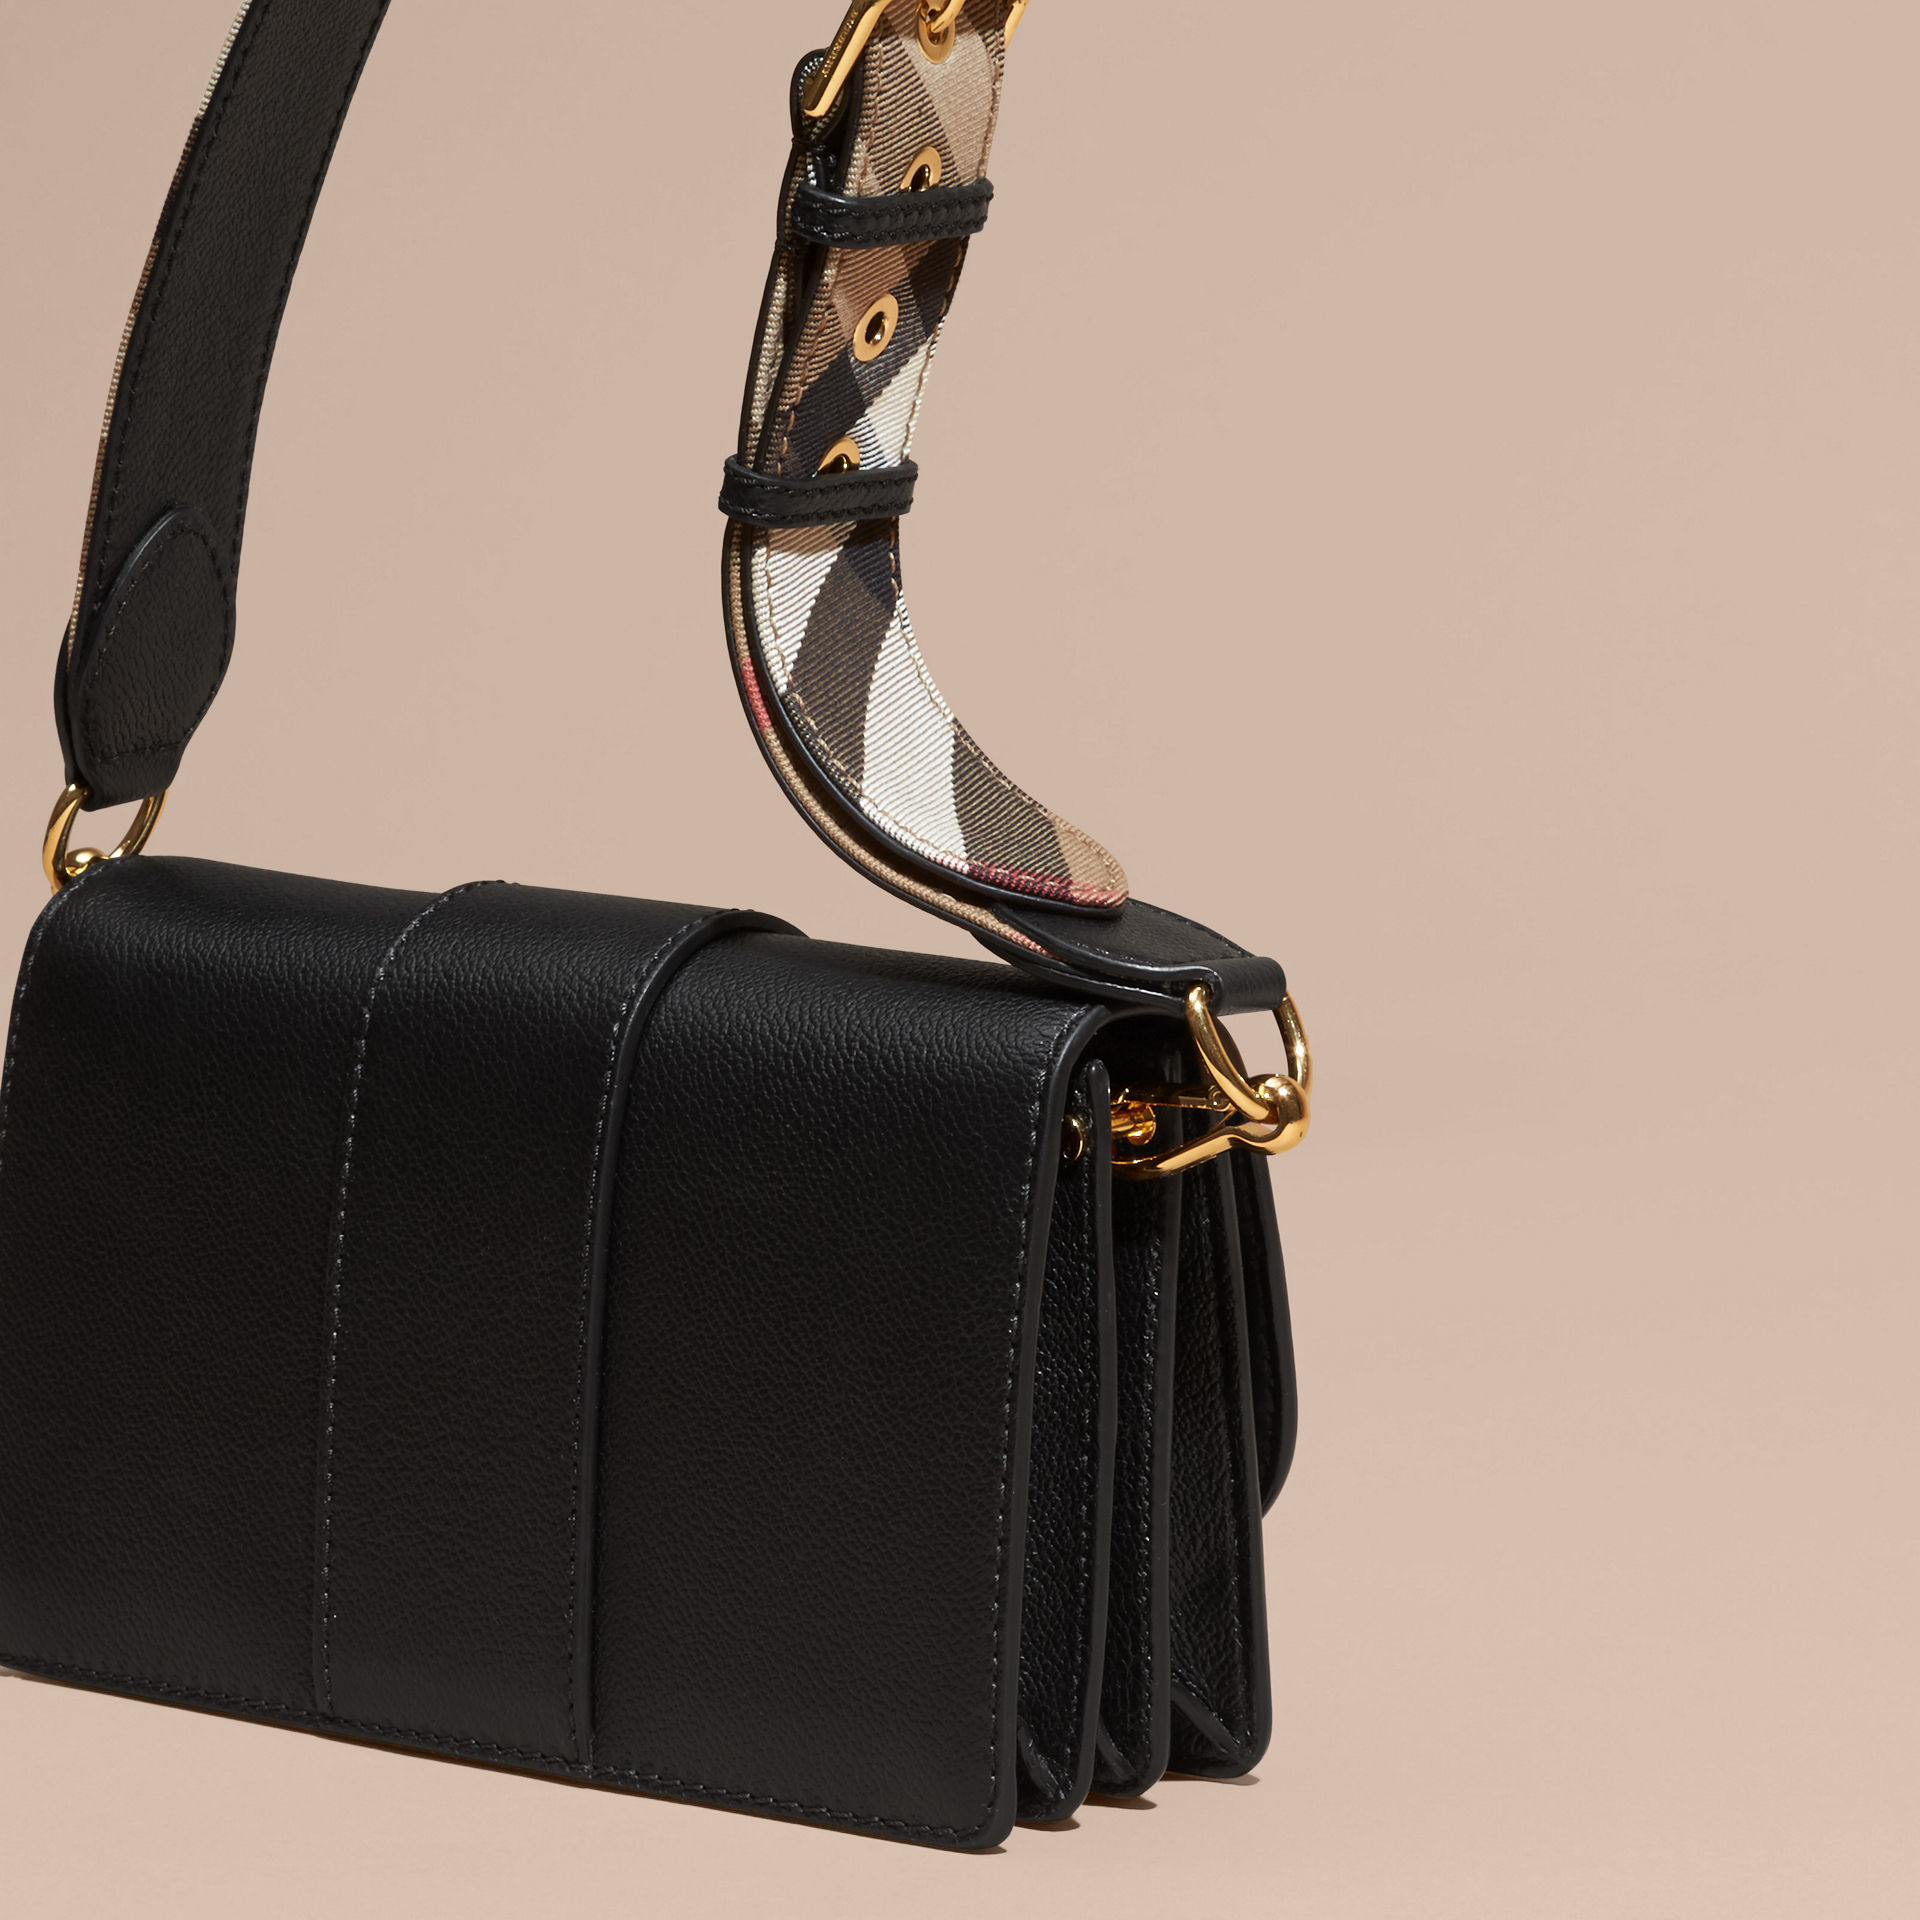 Lyst - Burberry The Small Leather Buckle Bag in Black